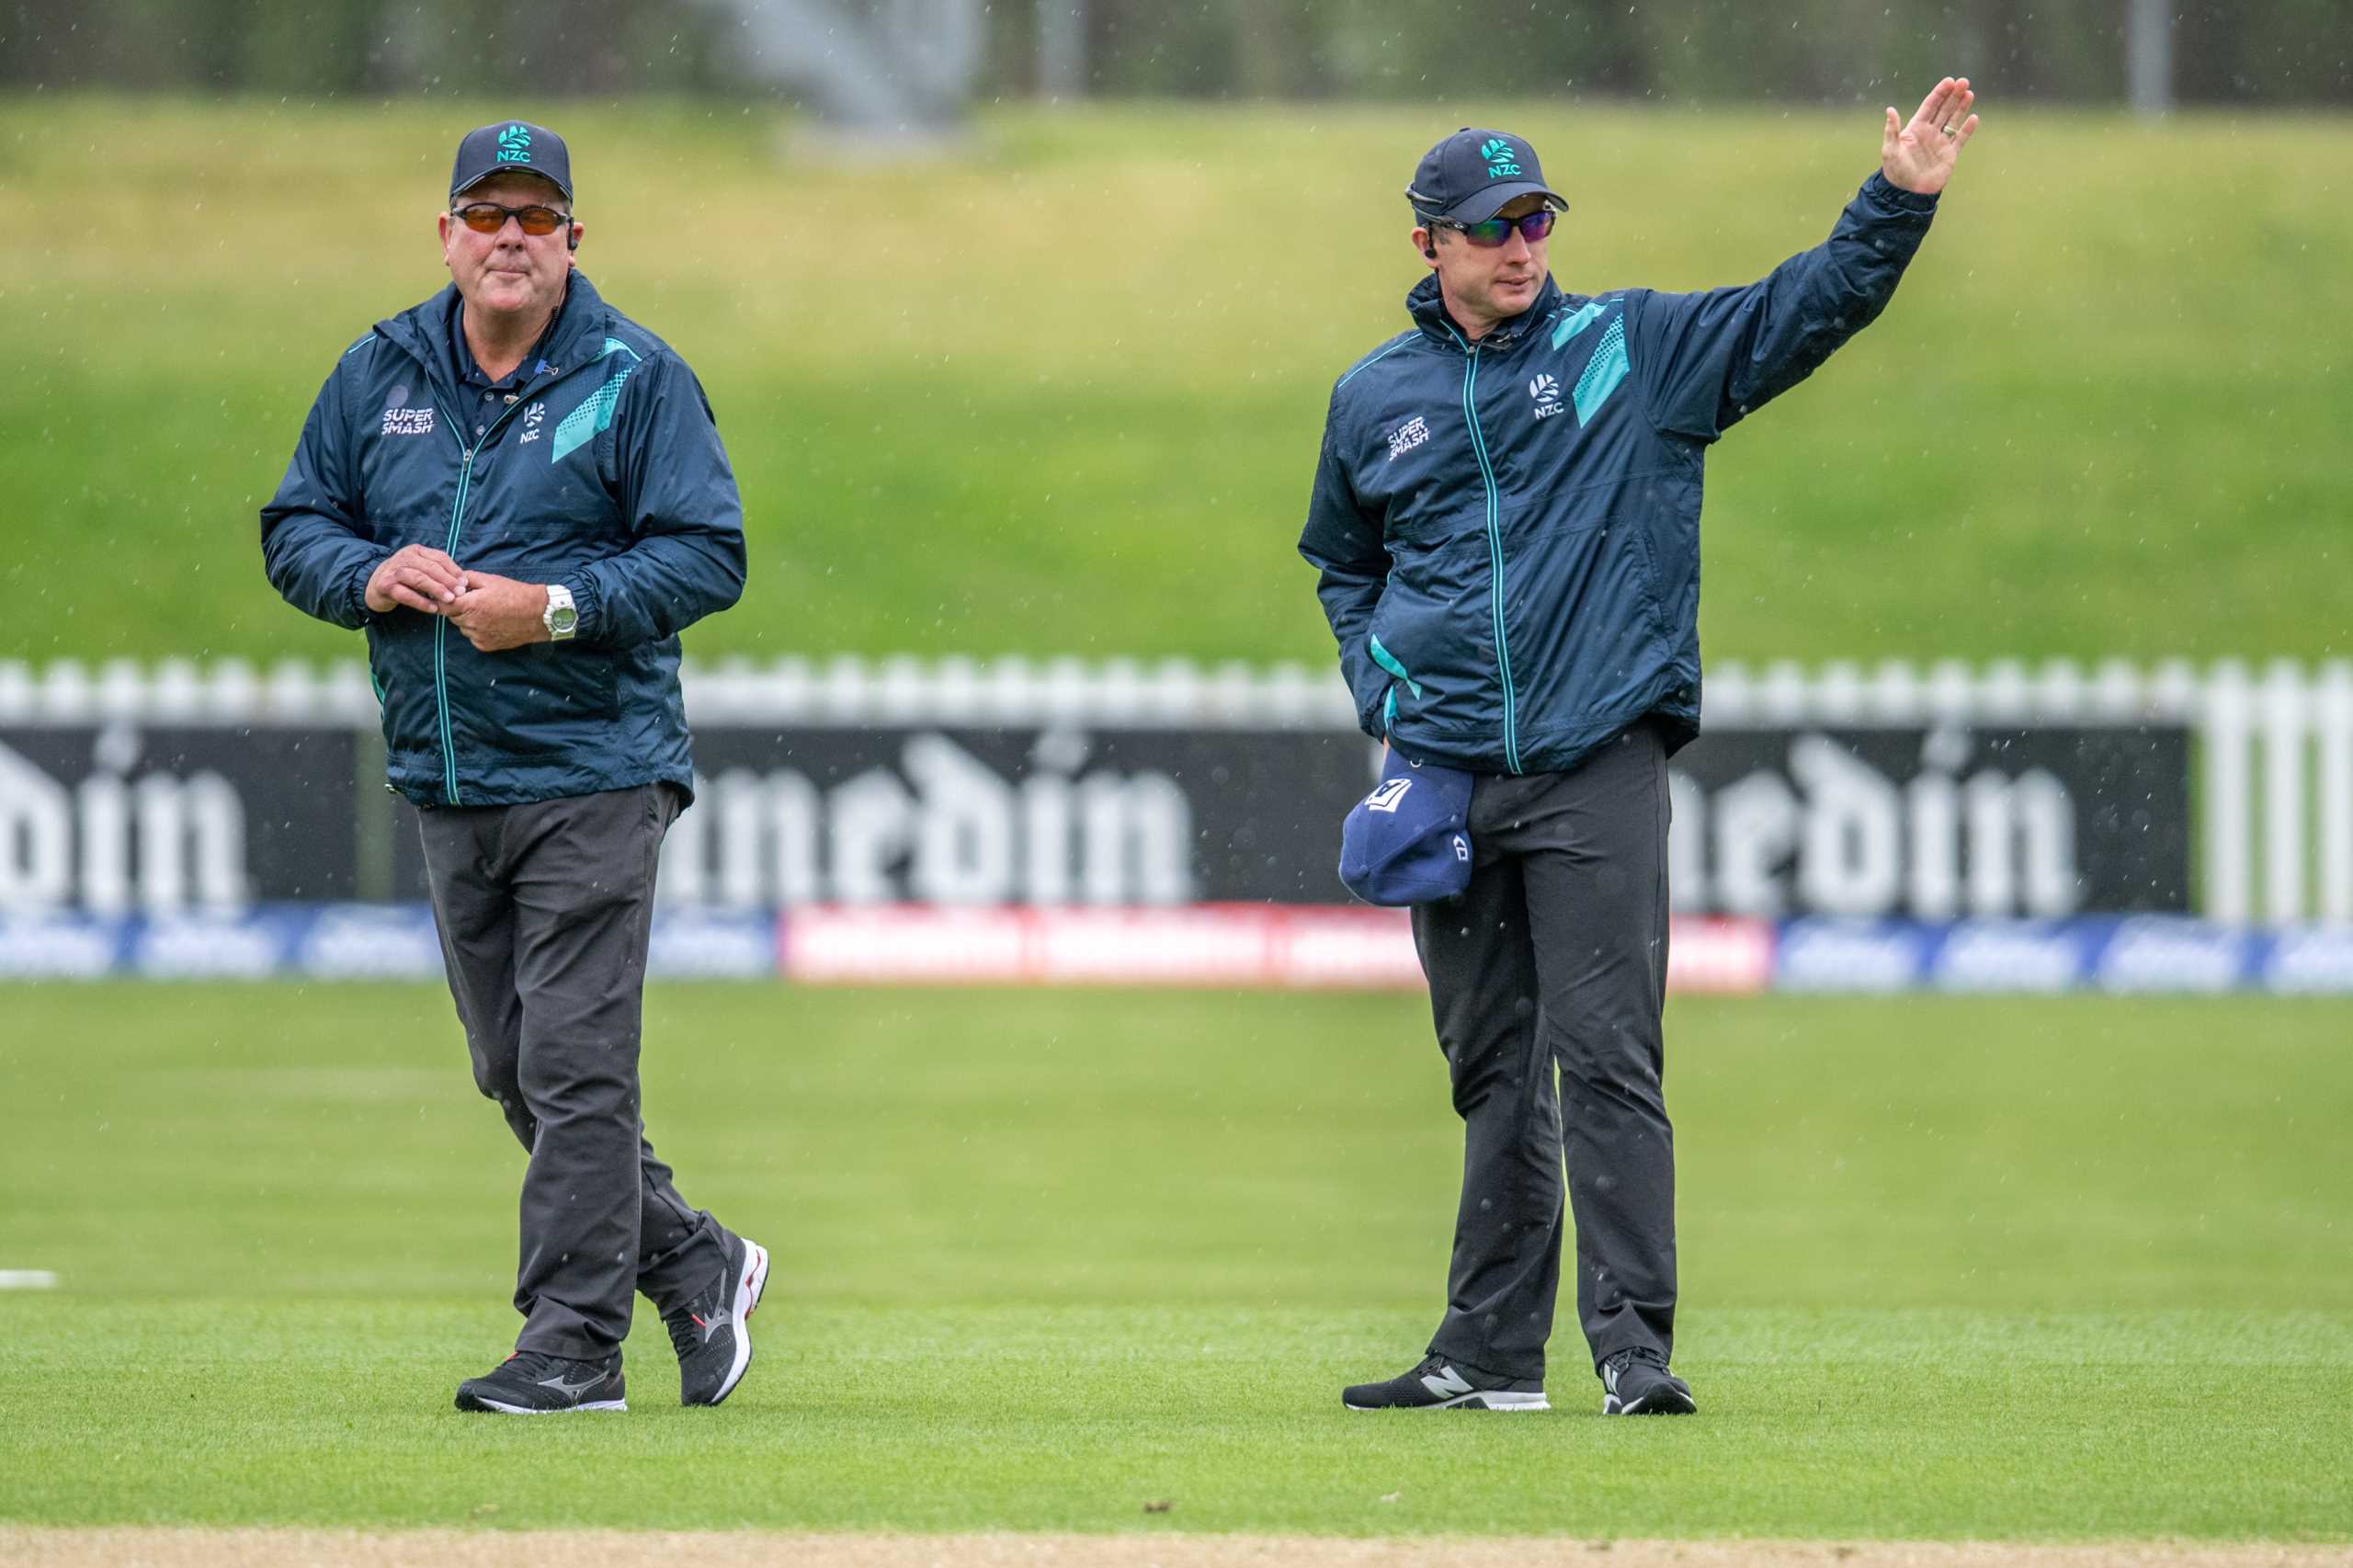 Umpires Derek Walker and Shaun Haig call the covers on during the Dream11 Super Smash T20 cricket match, Otago Volts v Auckland Aces at University of Otago Oval, Dunedin on the 19th December 2019
Copyright photo: Steve McArthur / www.photosport.nz